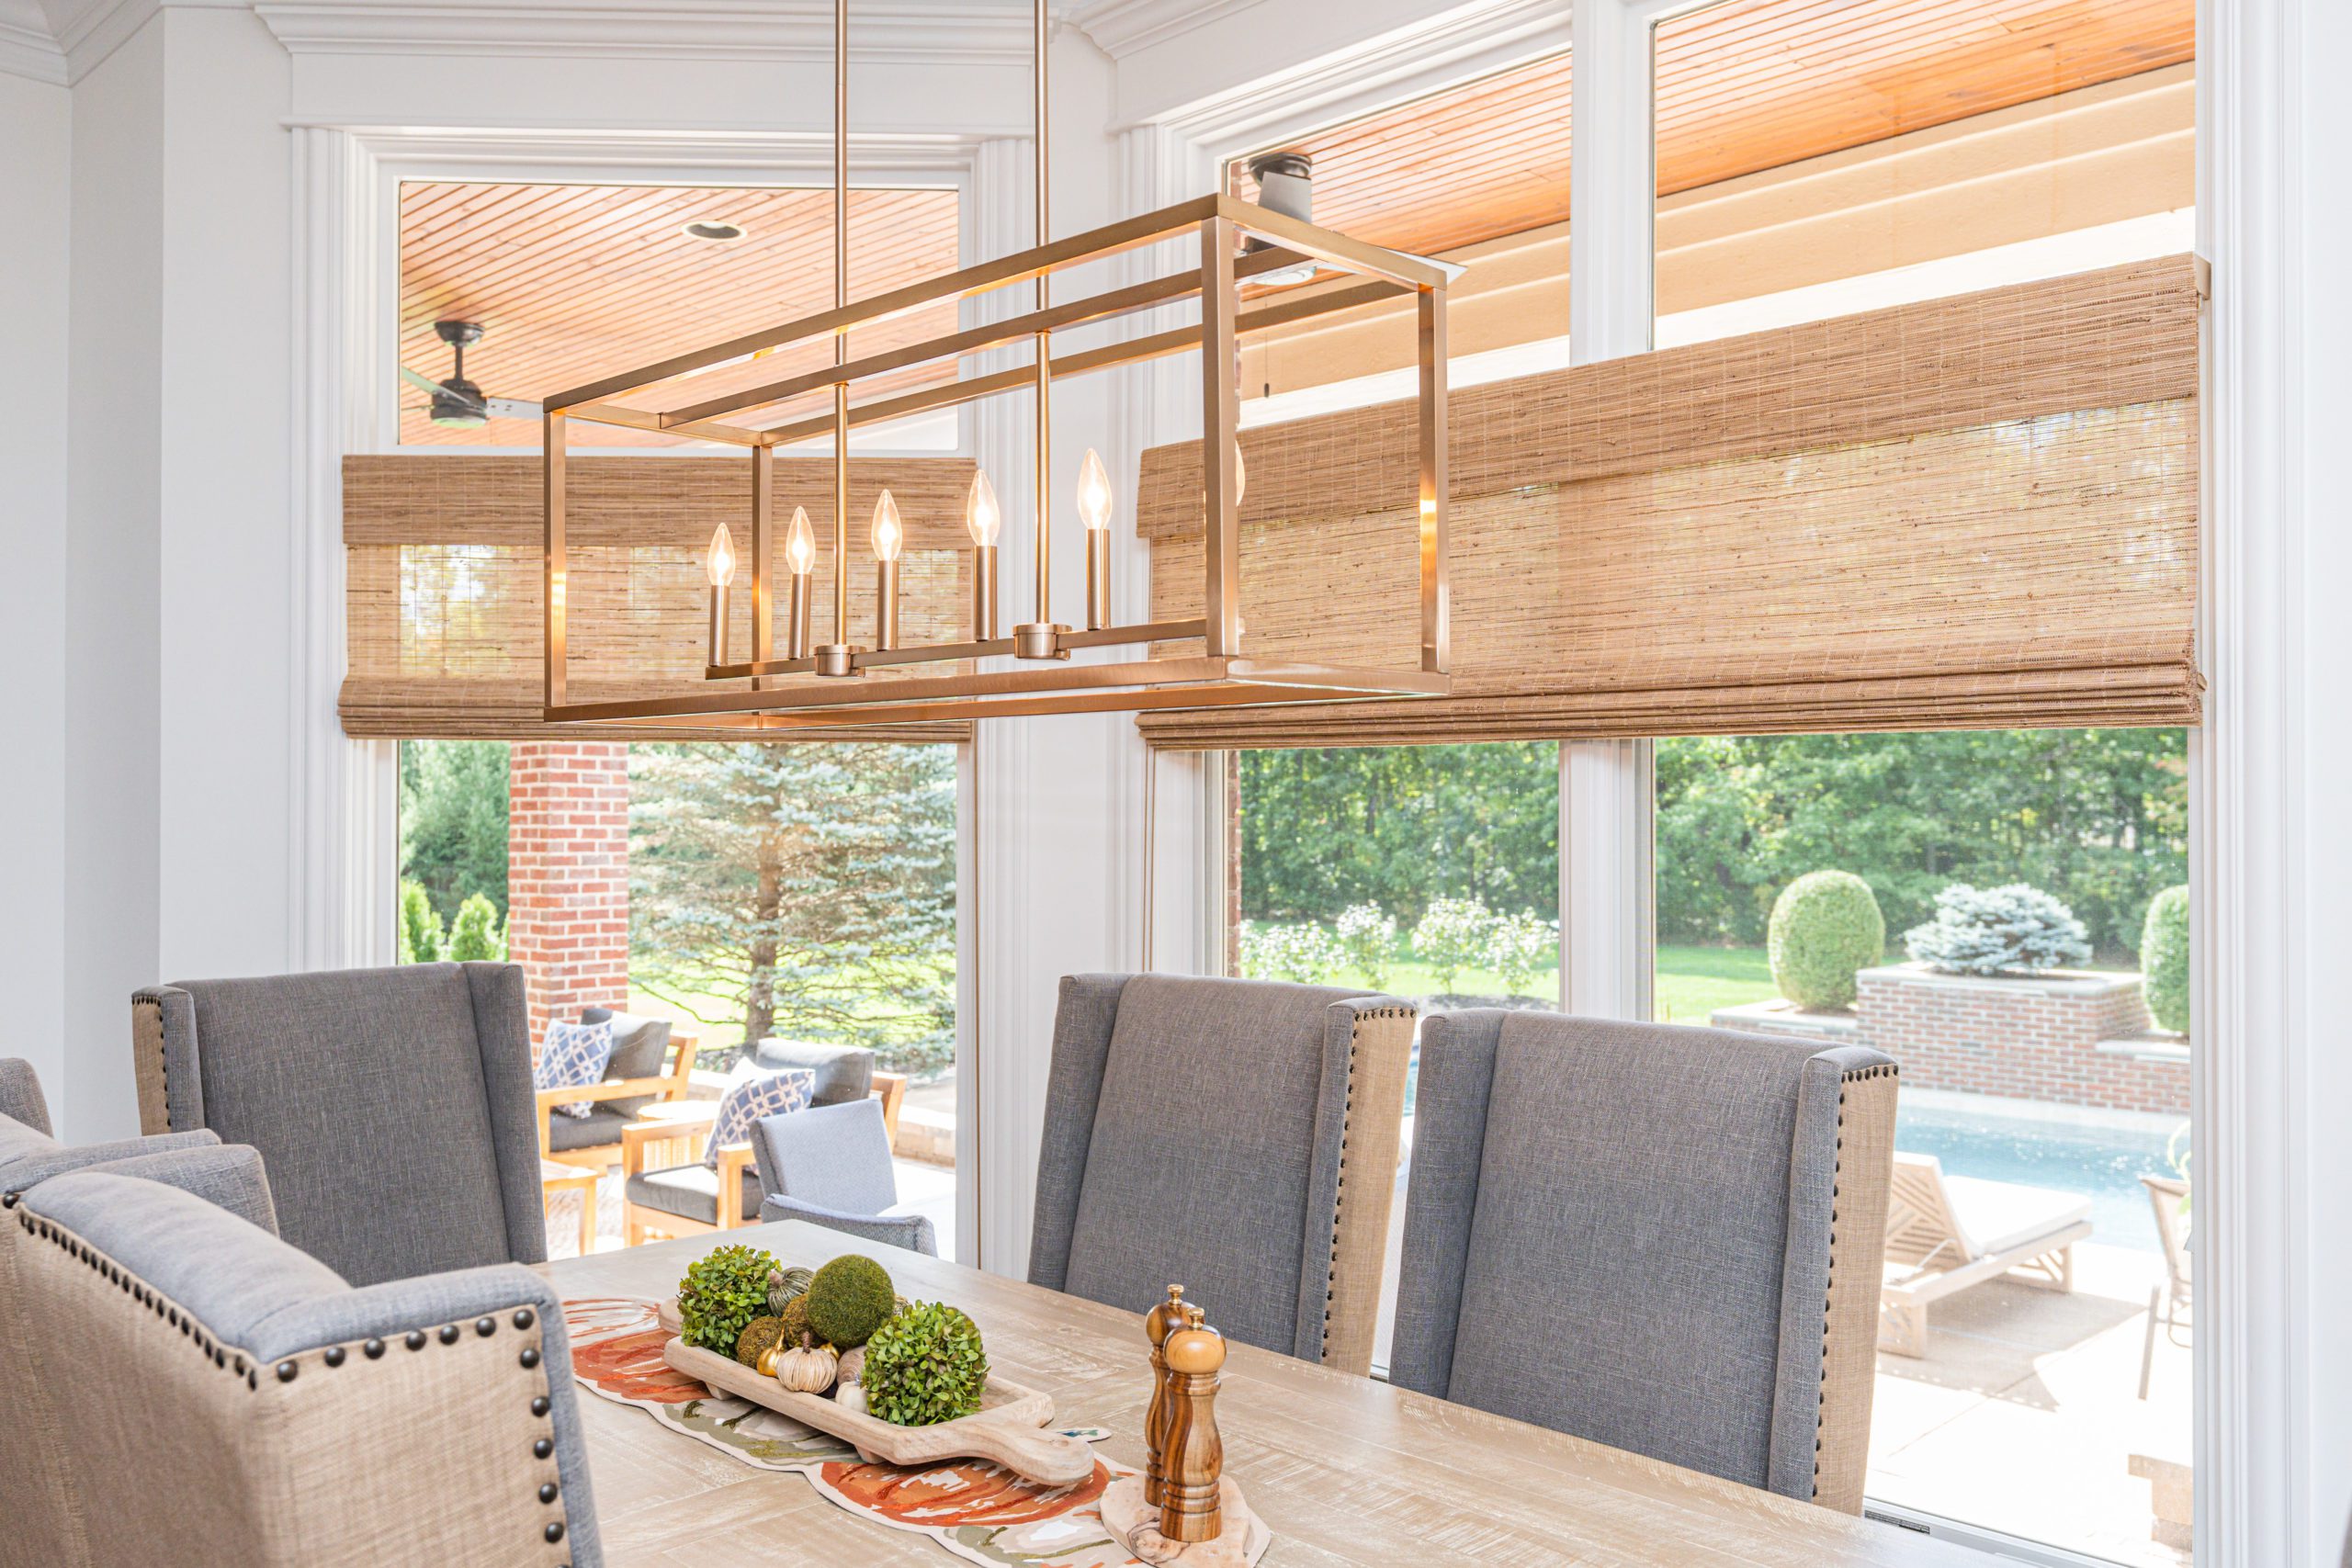 Woven wood shades in dining room to add texture